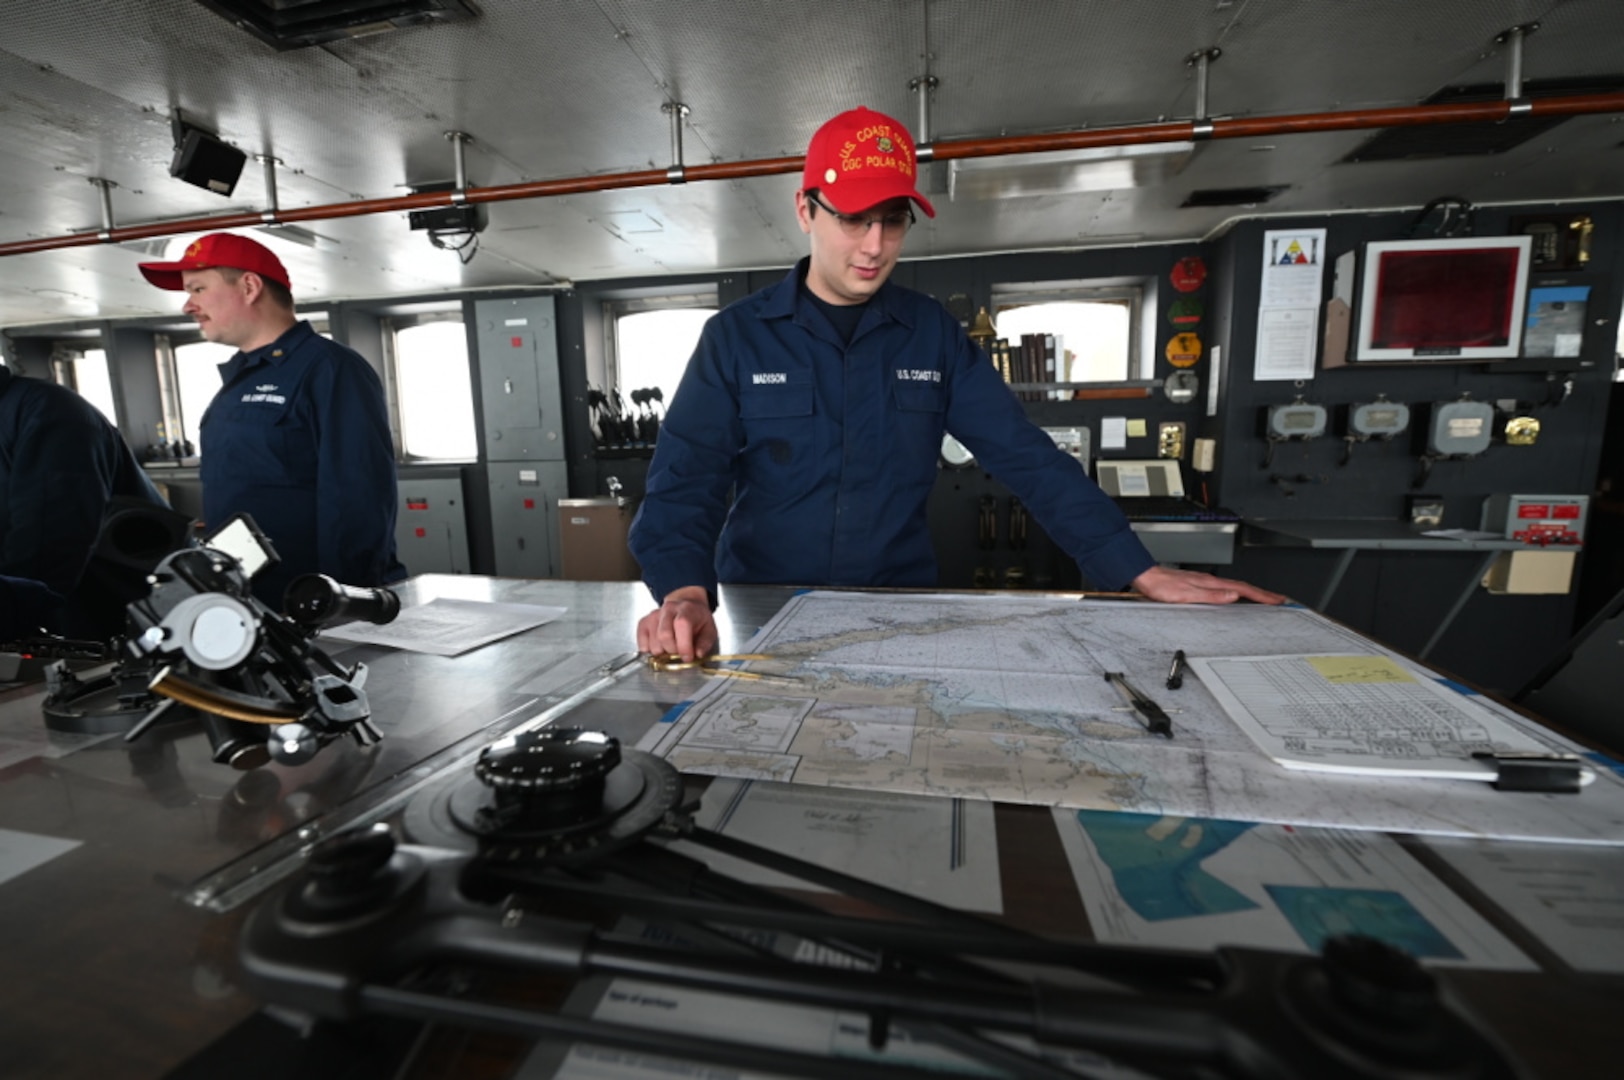 Coast Guard Cutter Polar Star (WAGB 10) crewmember Seaman Eli Madison, a native of Northwood, New Hampshire, stands watch on the bridge while underway in the Bering Sea, Monday, Feb. 1, 2021. The Polar Star is underway in the Arctic to protect the nation’s maritime sovereignty and security throughout the region. U.S. Coast Guard Photo by Petty Officer 1st Class Cynthia Oldham.